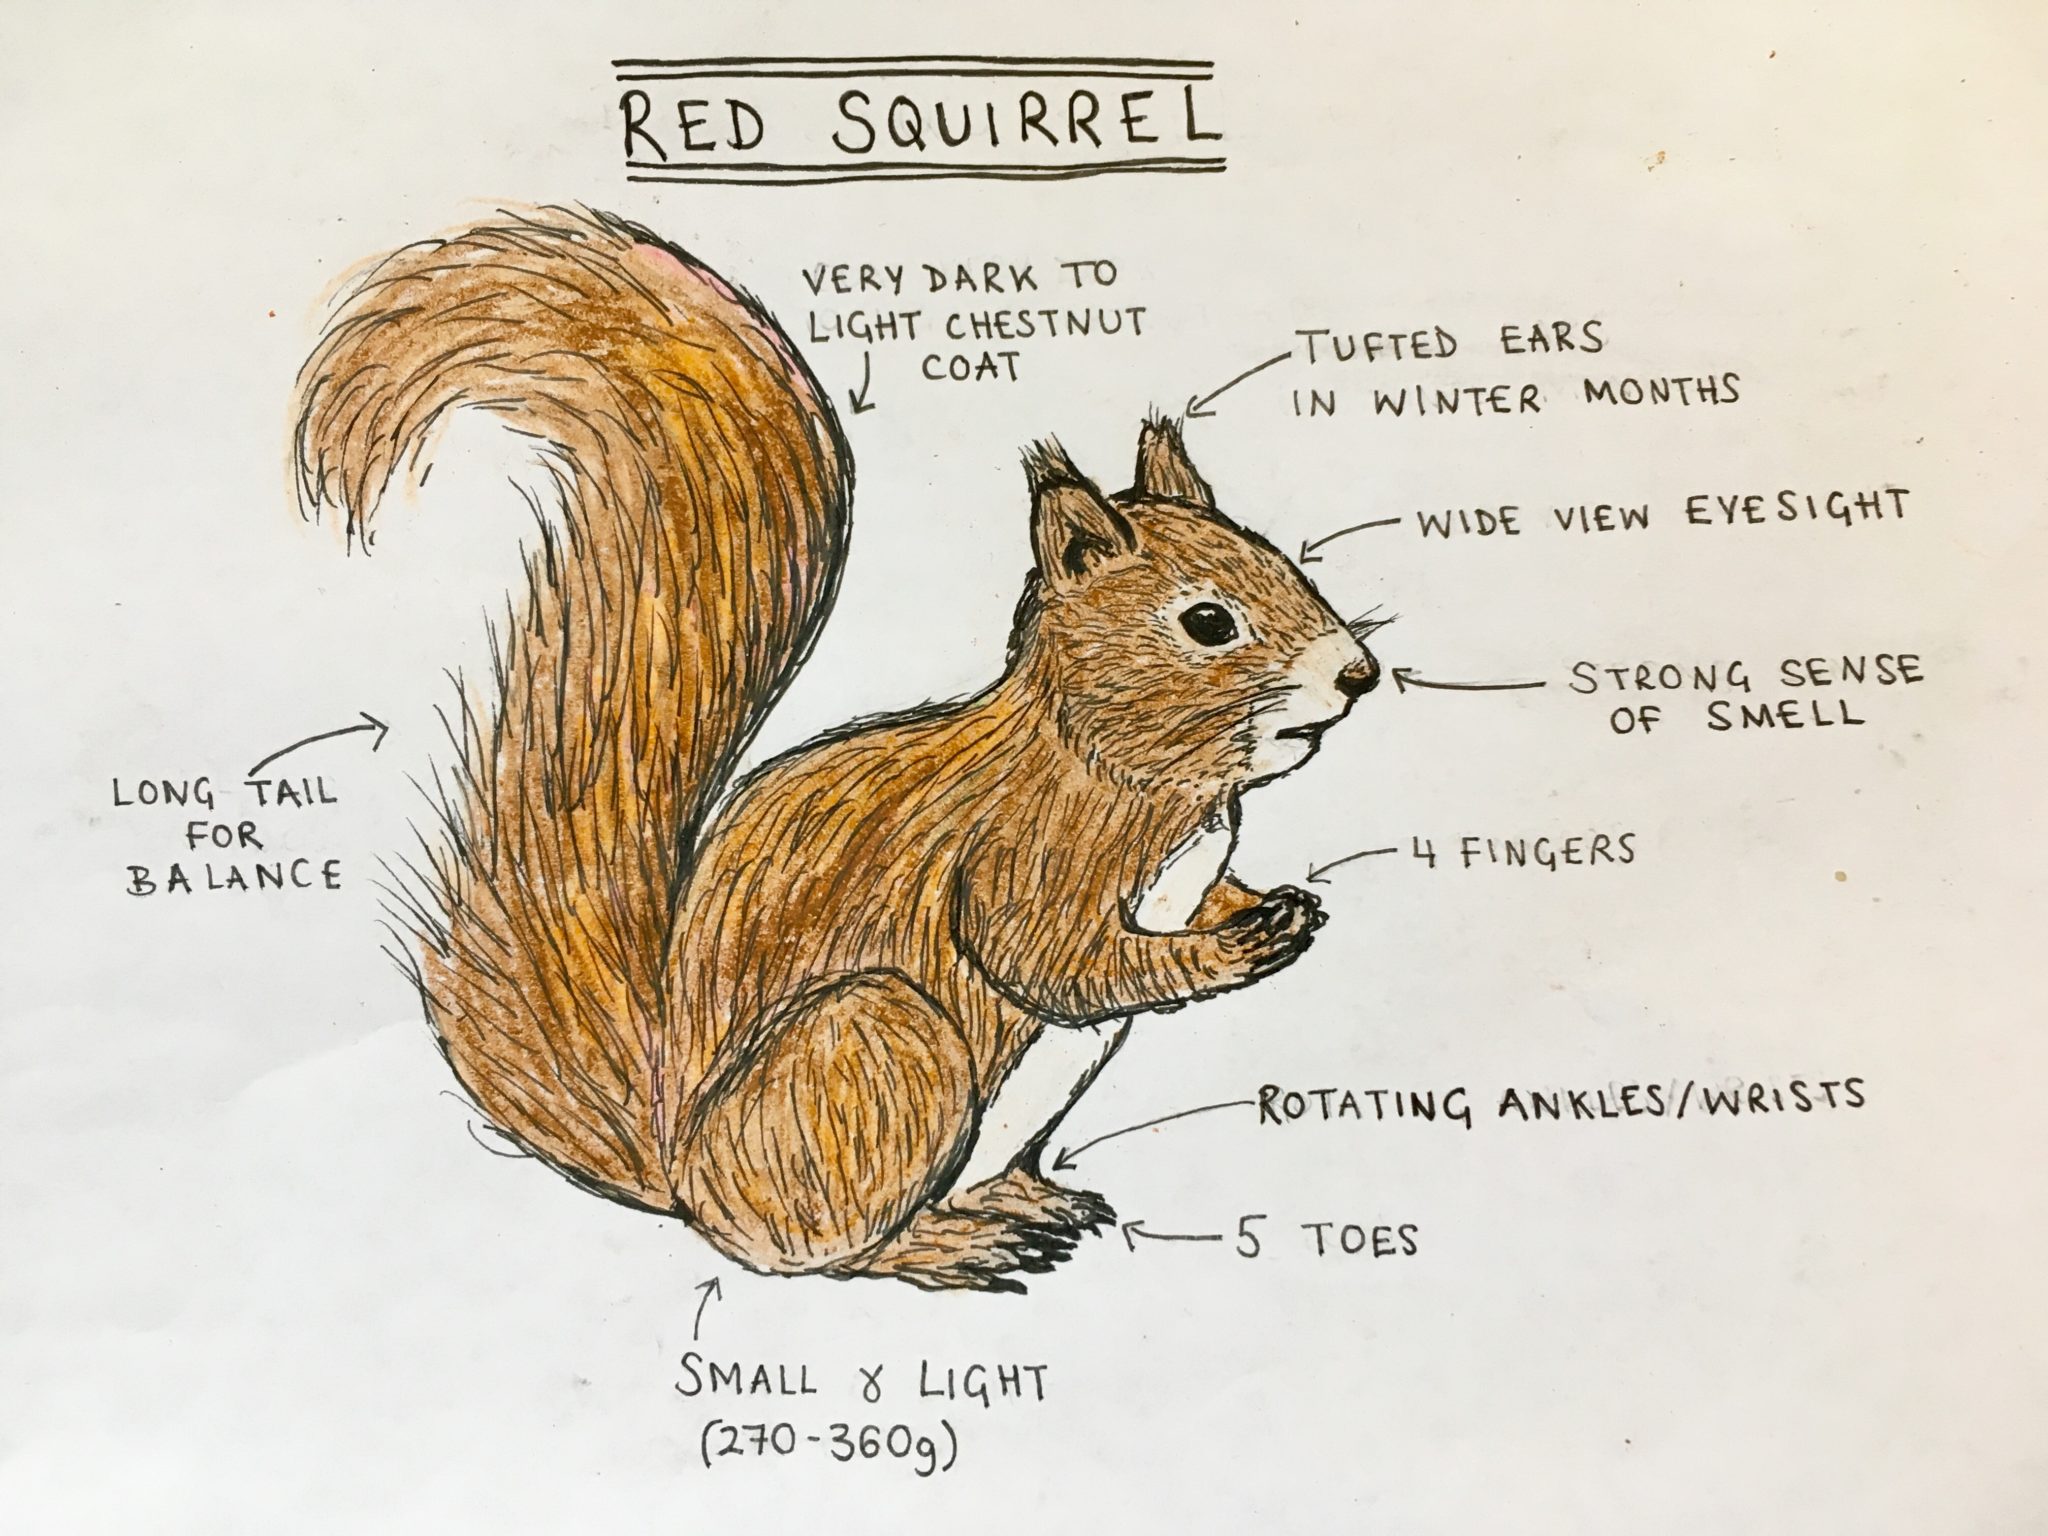 Ear Tufts and Fluffy All About Red Squirrels | Wildlife Trust